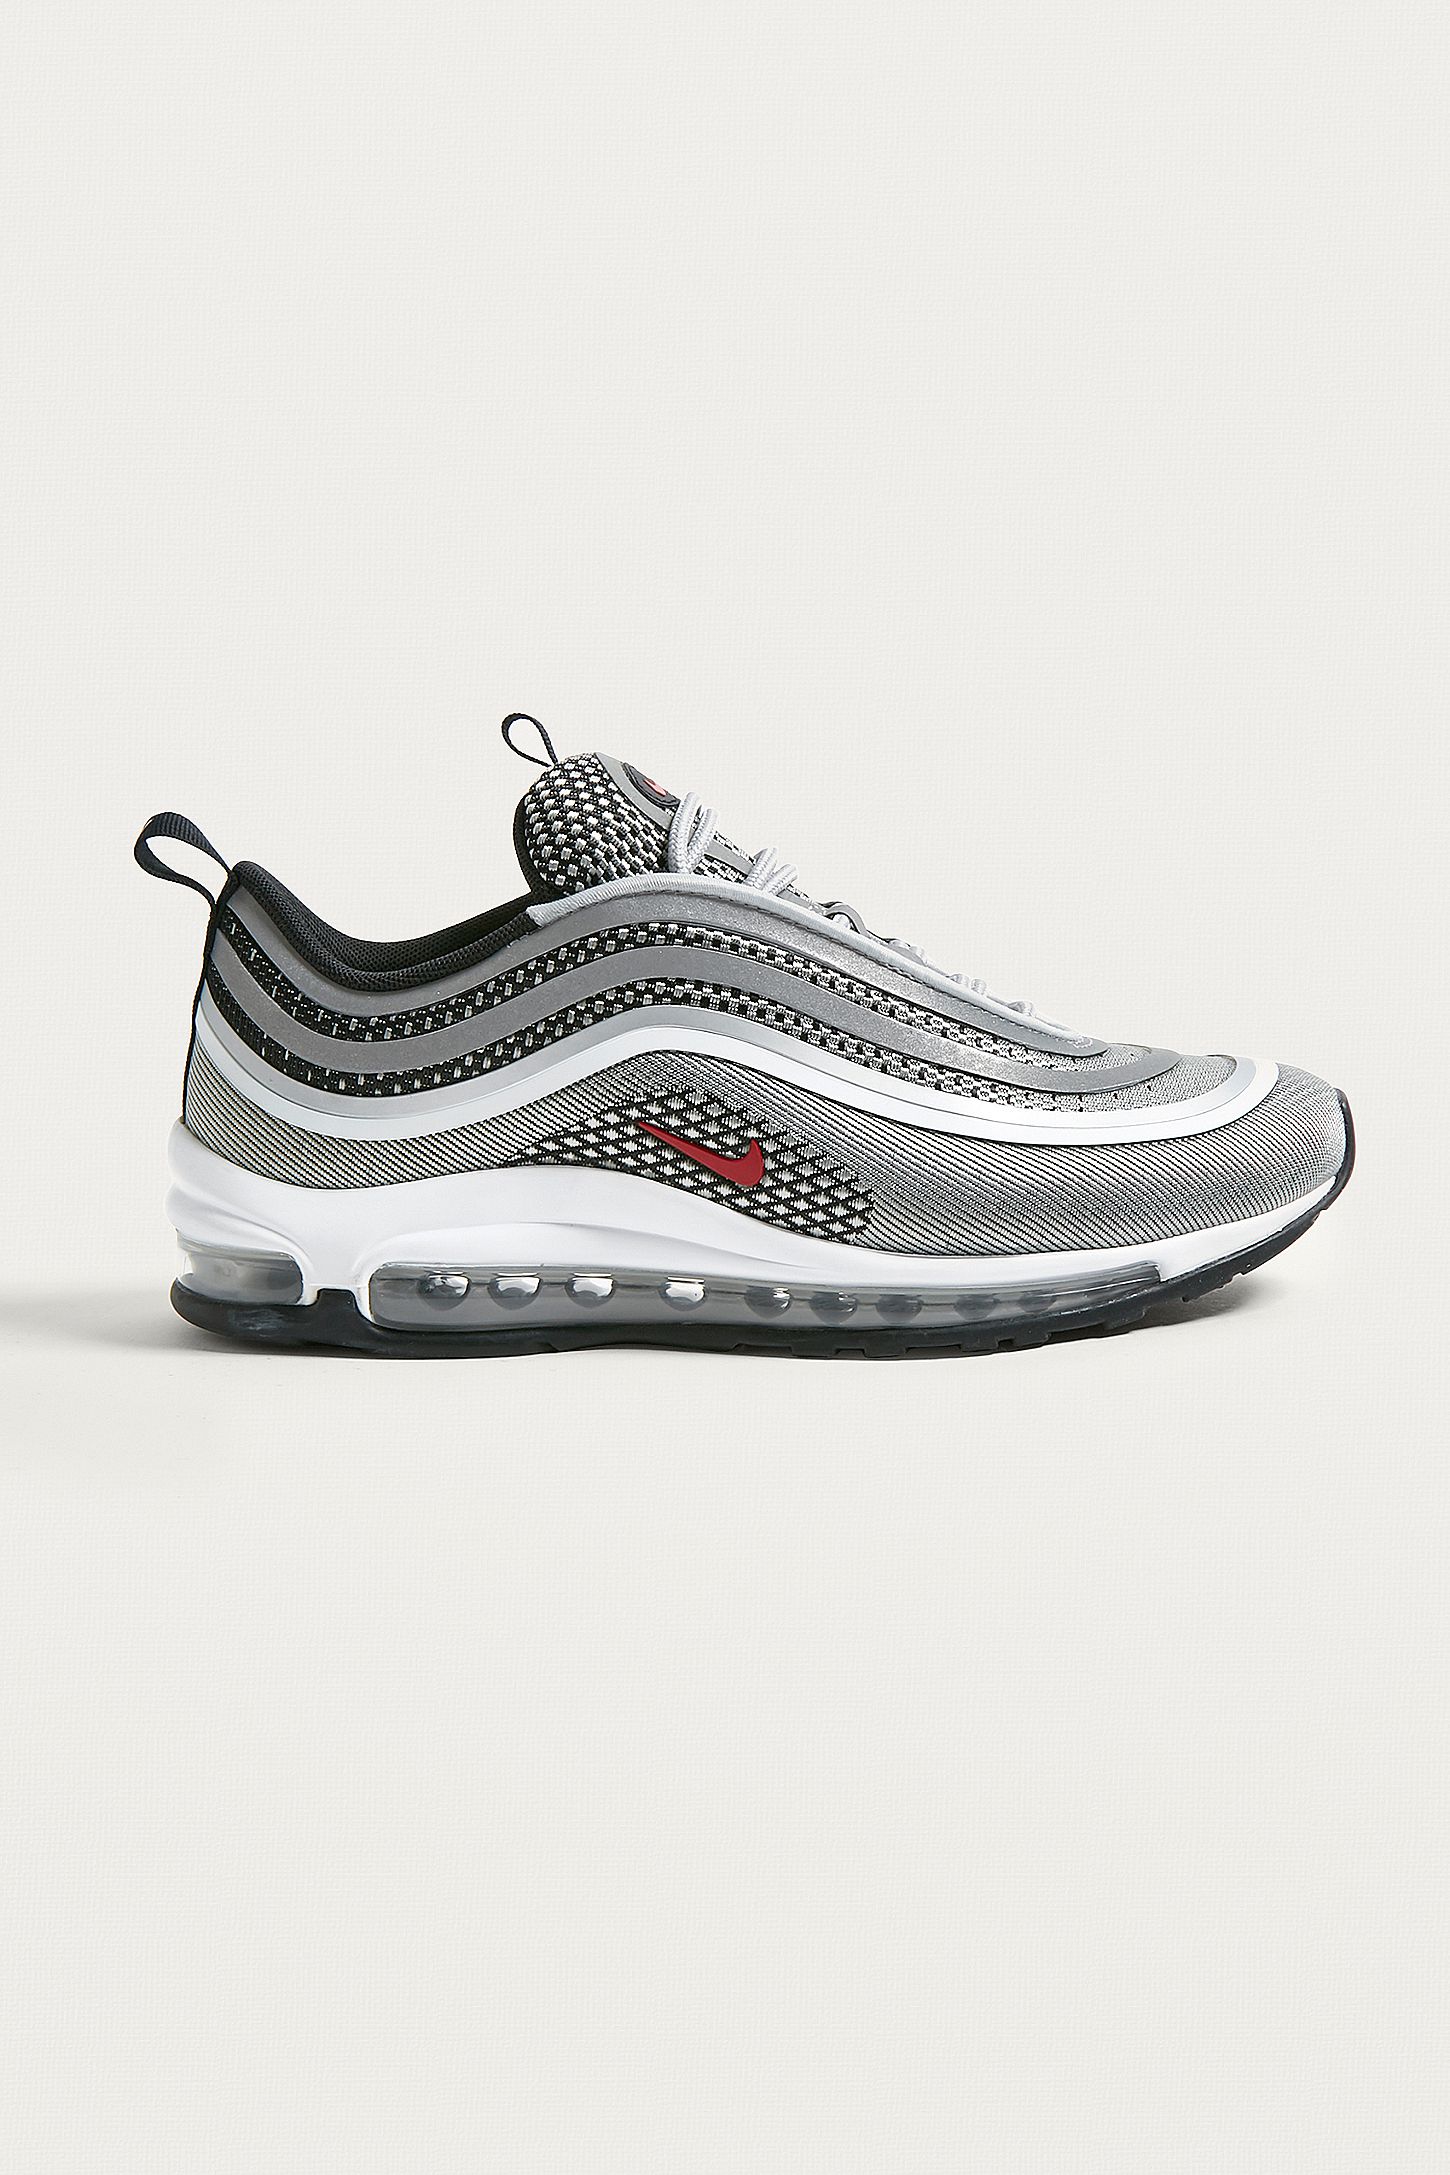 Nike Air Max 97 Junior Grey Kids from Jd 21 Buttons